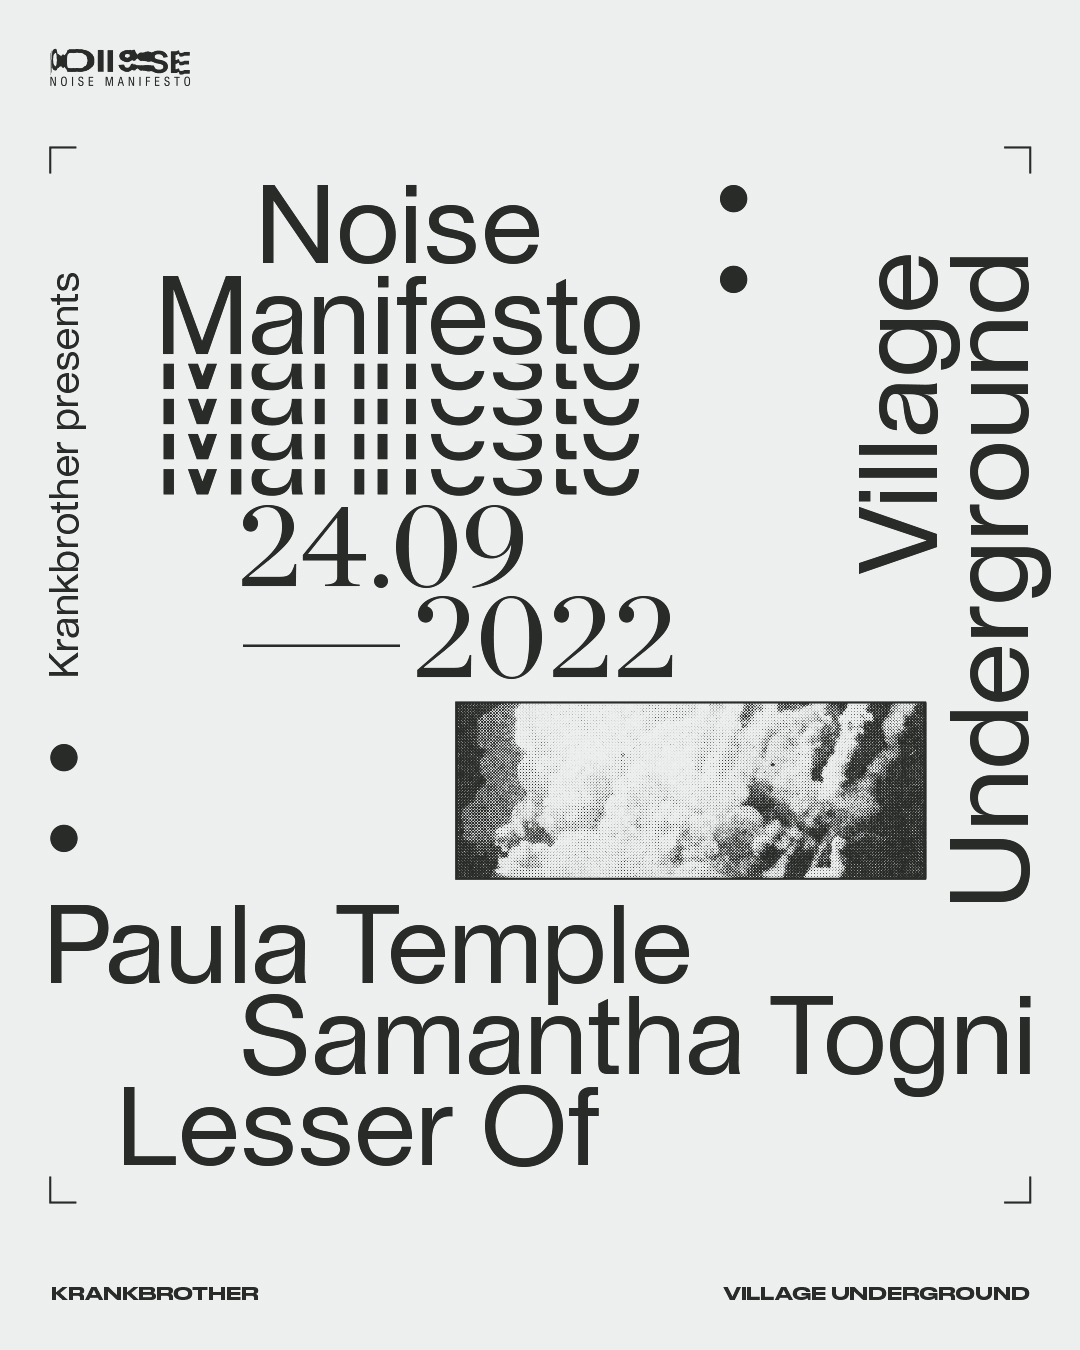 krankbrother presents Noise Manifesto with Paula Temple, Samantha Togni, Lesser Of - Flyer front